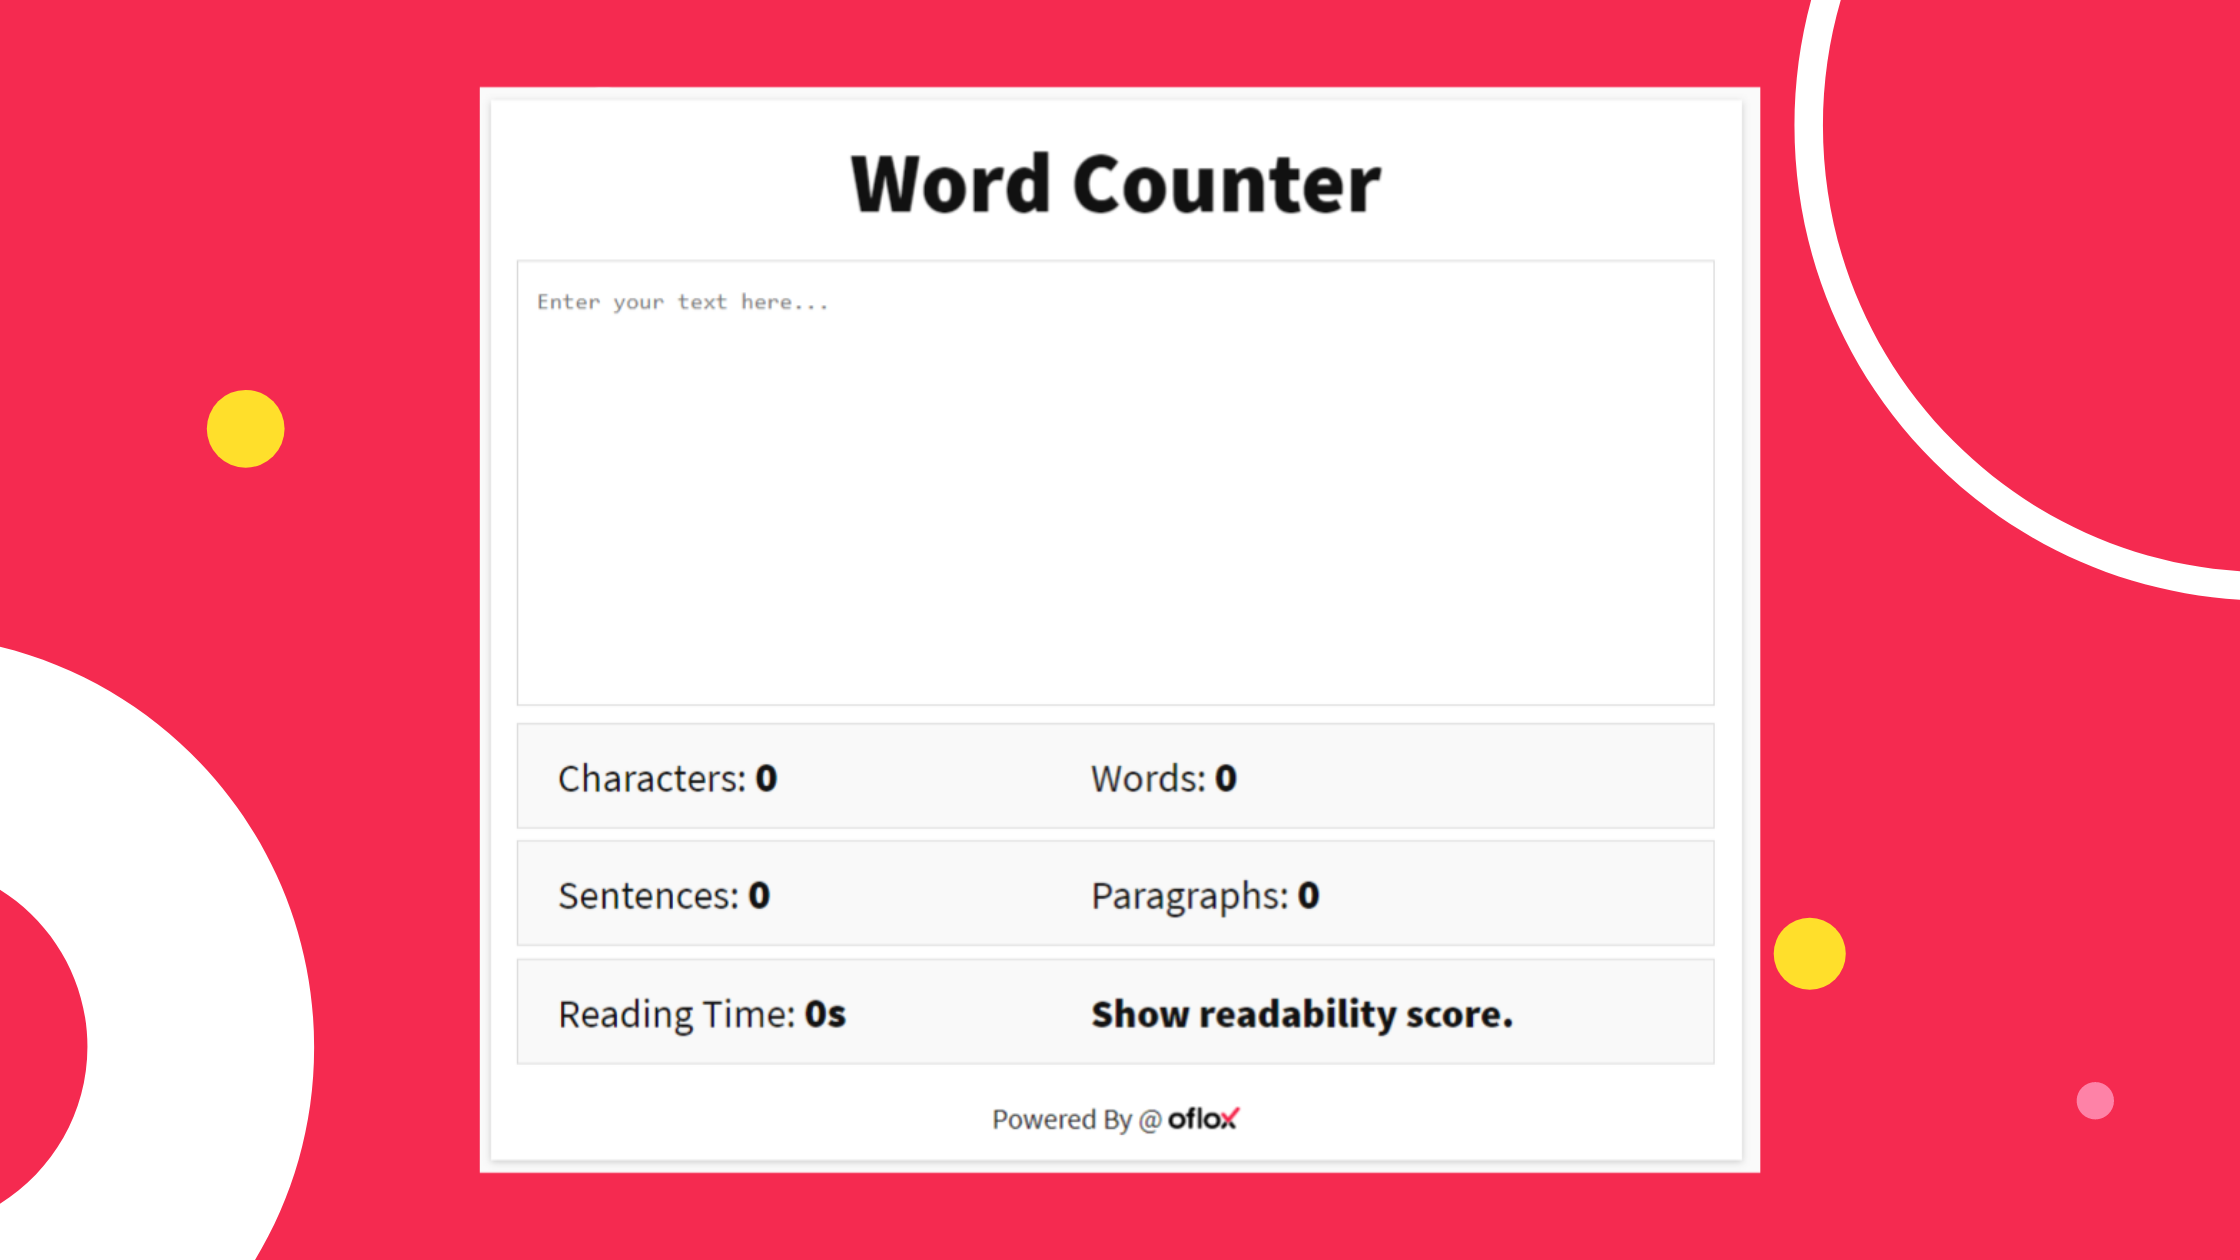 How To Make A Word Counter